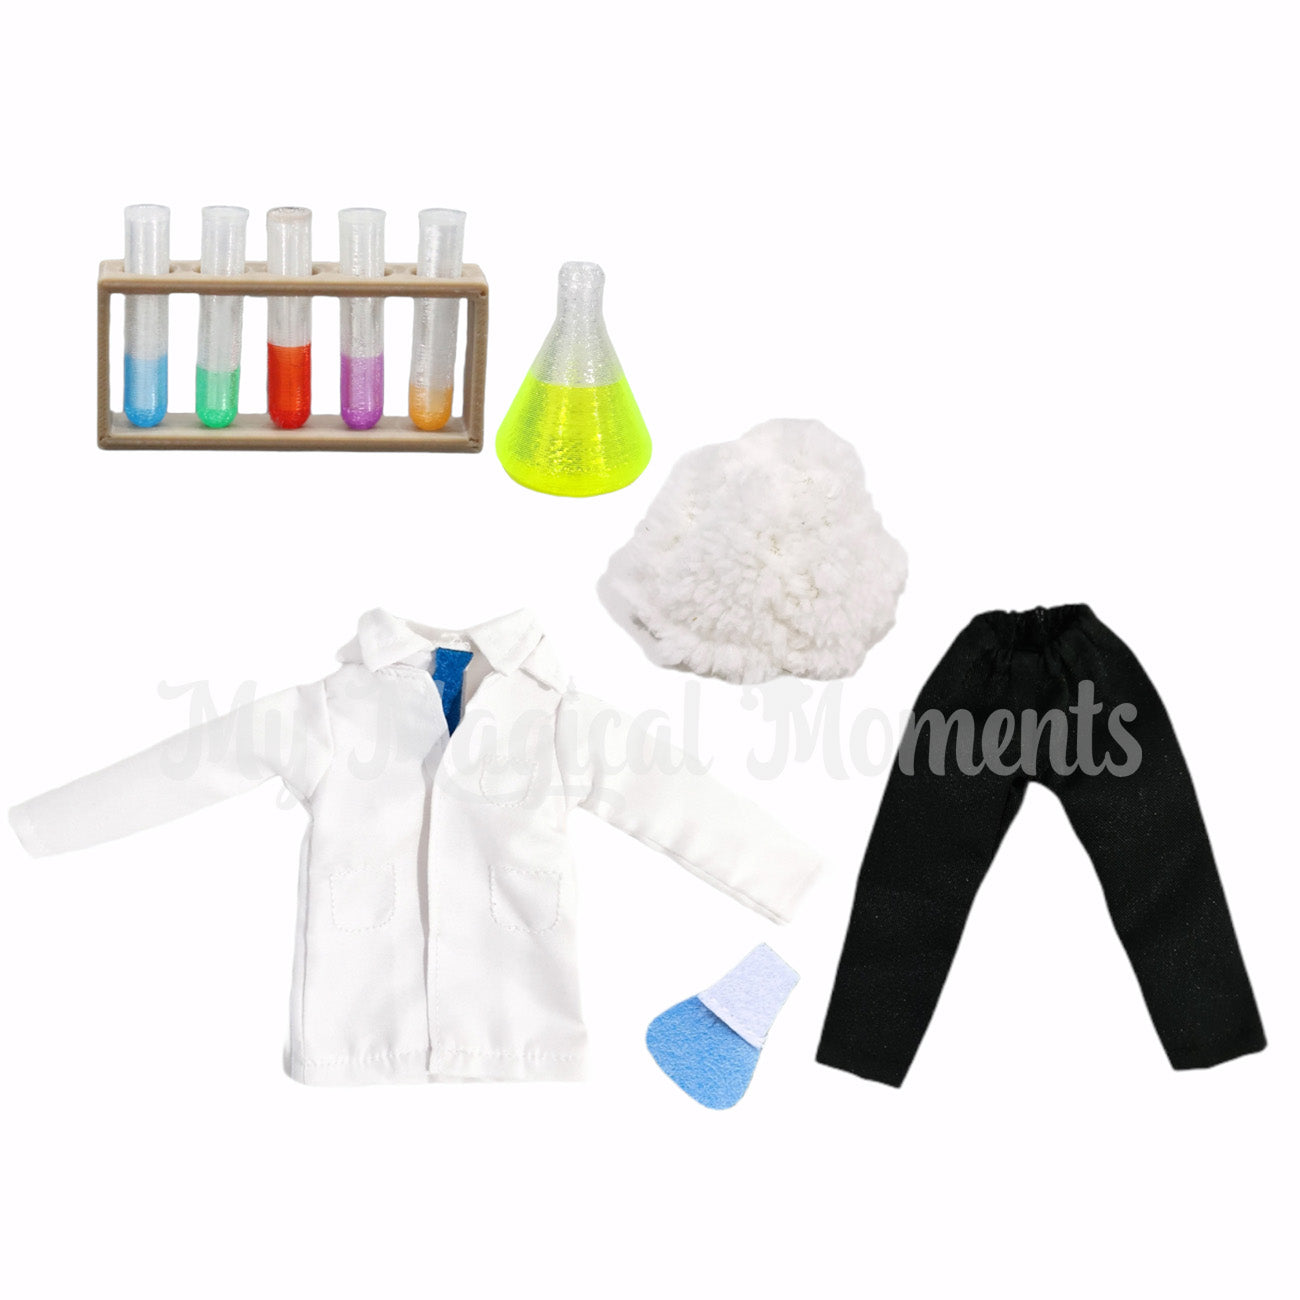 Elf sized scientist with chemistry set, beaker, test tubes, lab coat, white wig and pants